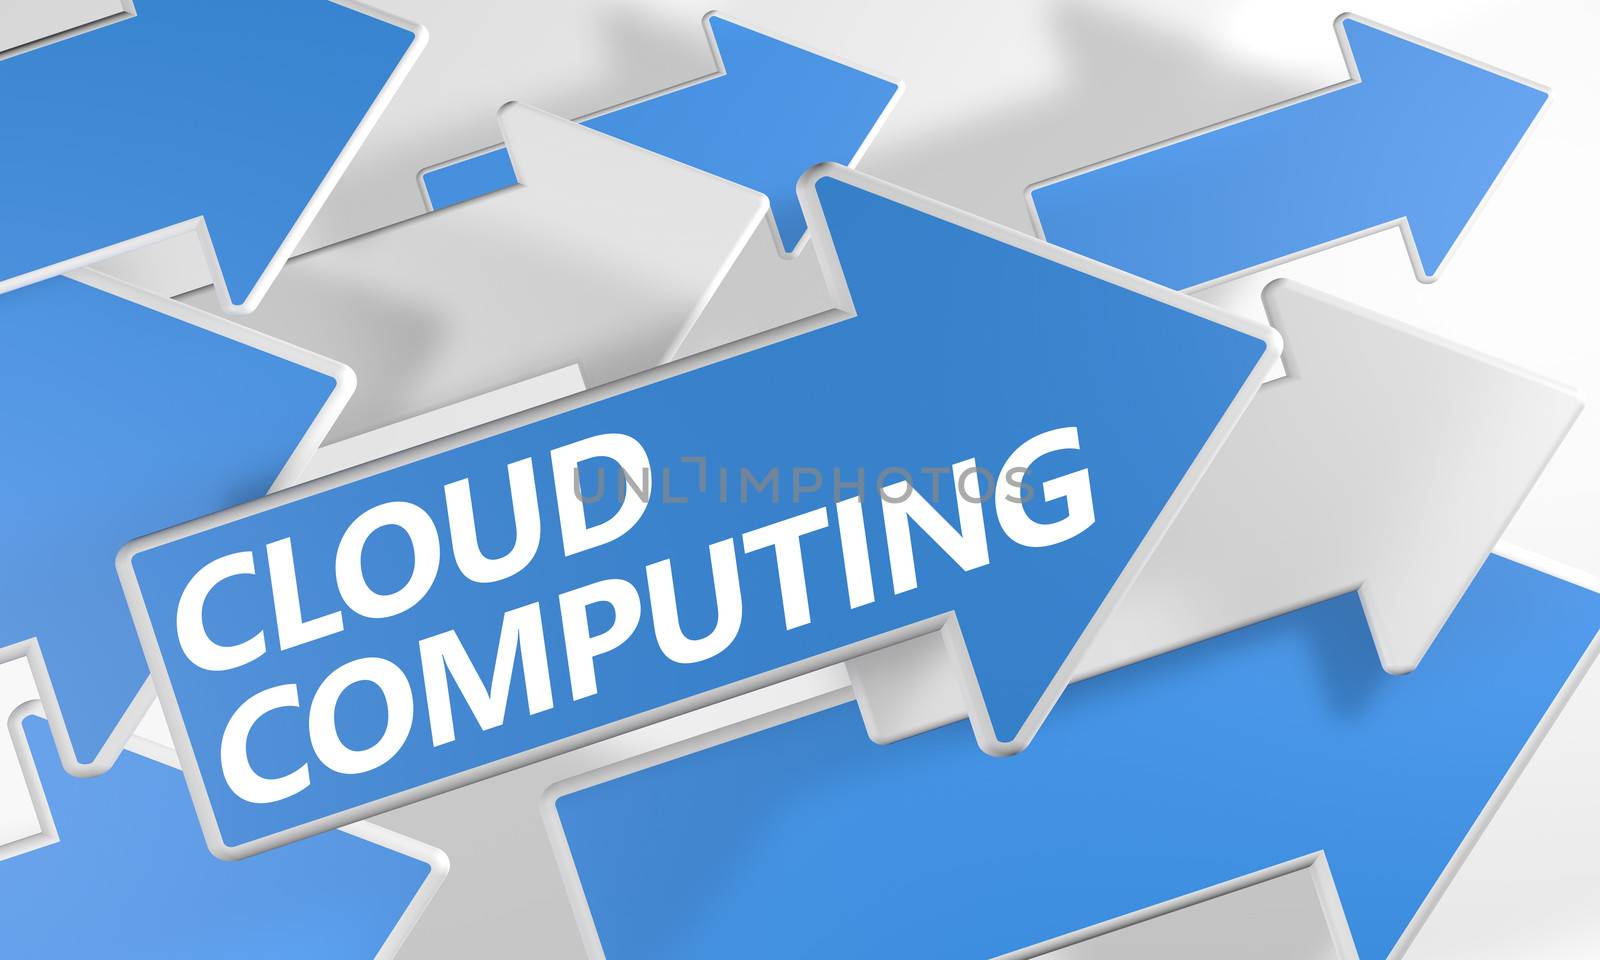 Cloud Computing 3d render concept with blue and white arrows flying over a white background.